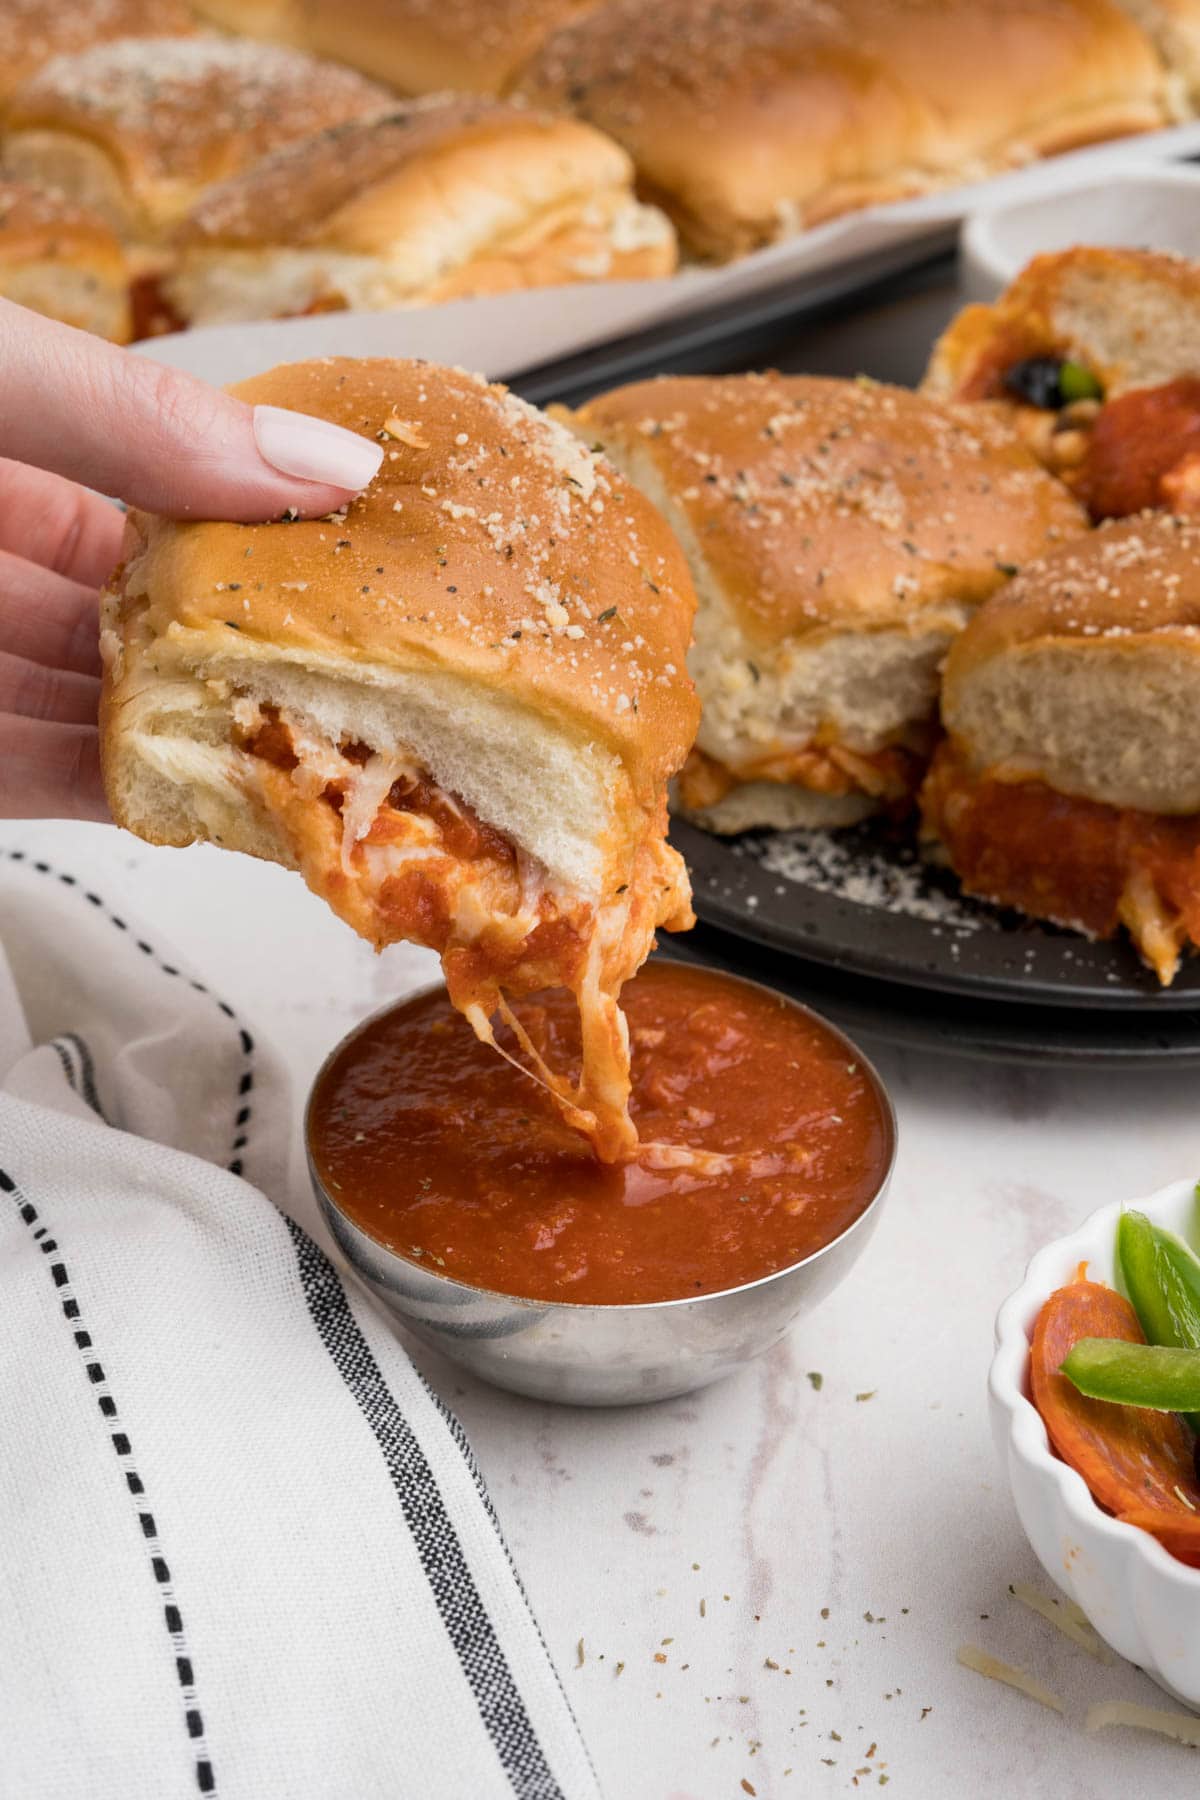 A hand holding one slider and dipping it in pizza sauce.